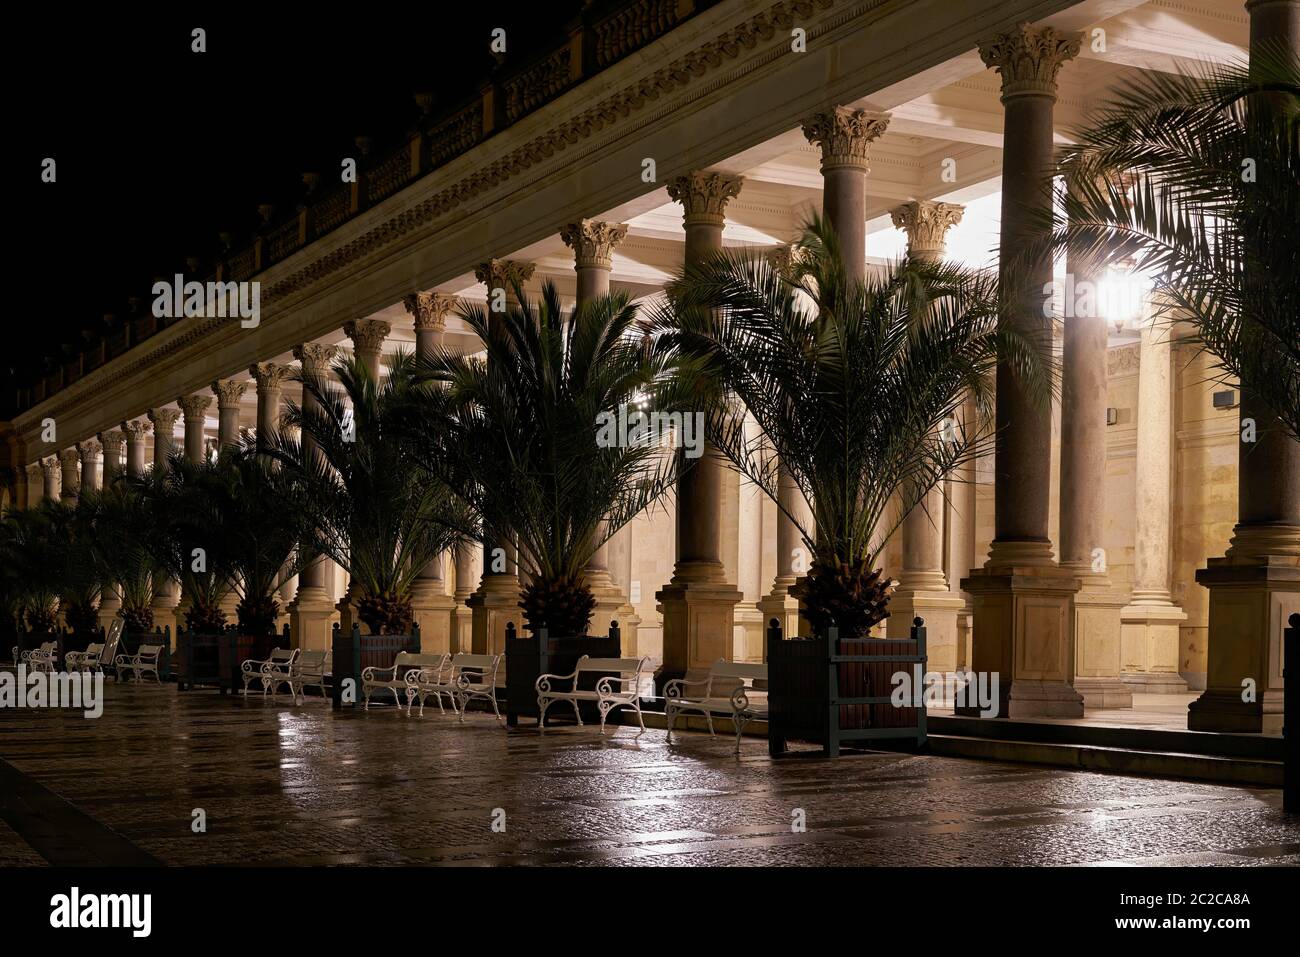 Mill Colonnade in the old town of Karlovy Vary, in the Czech Republic at night Stock Photo